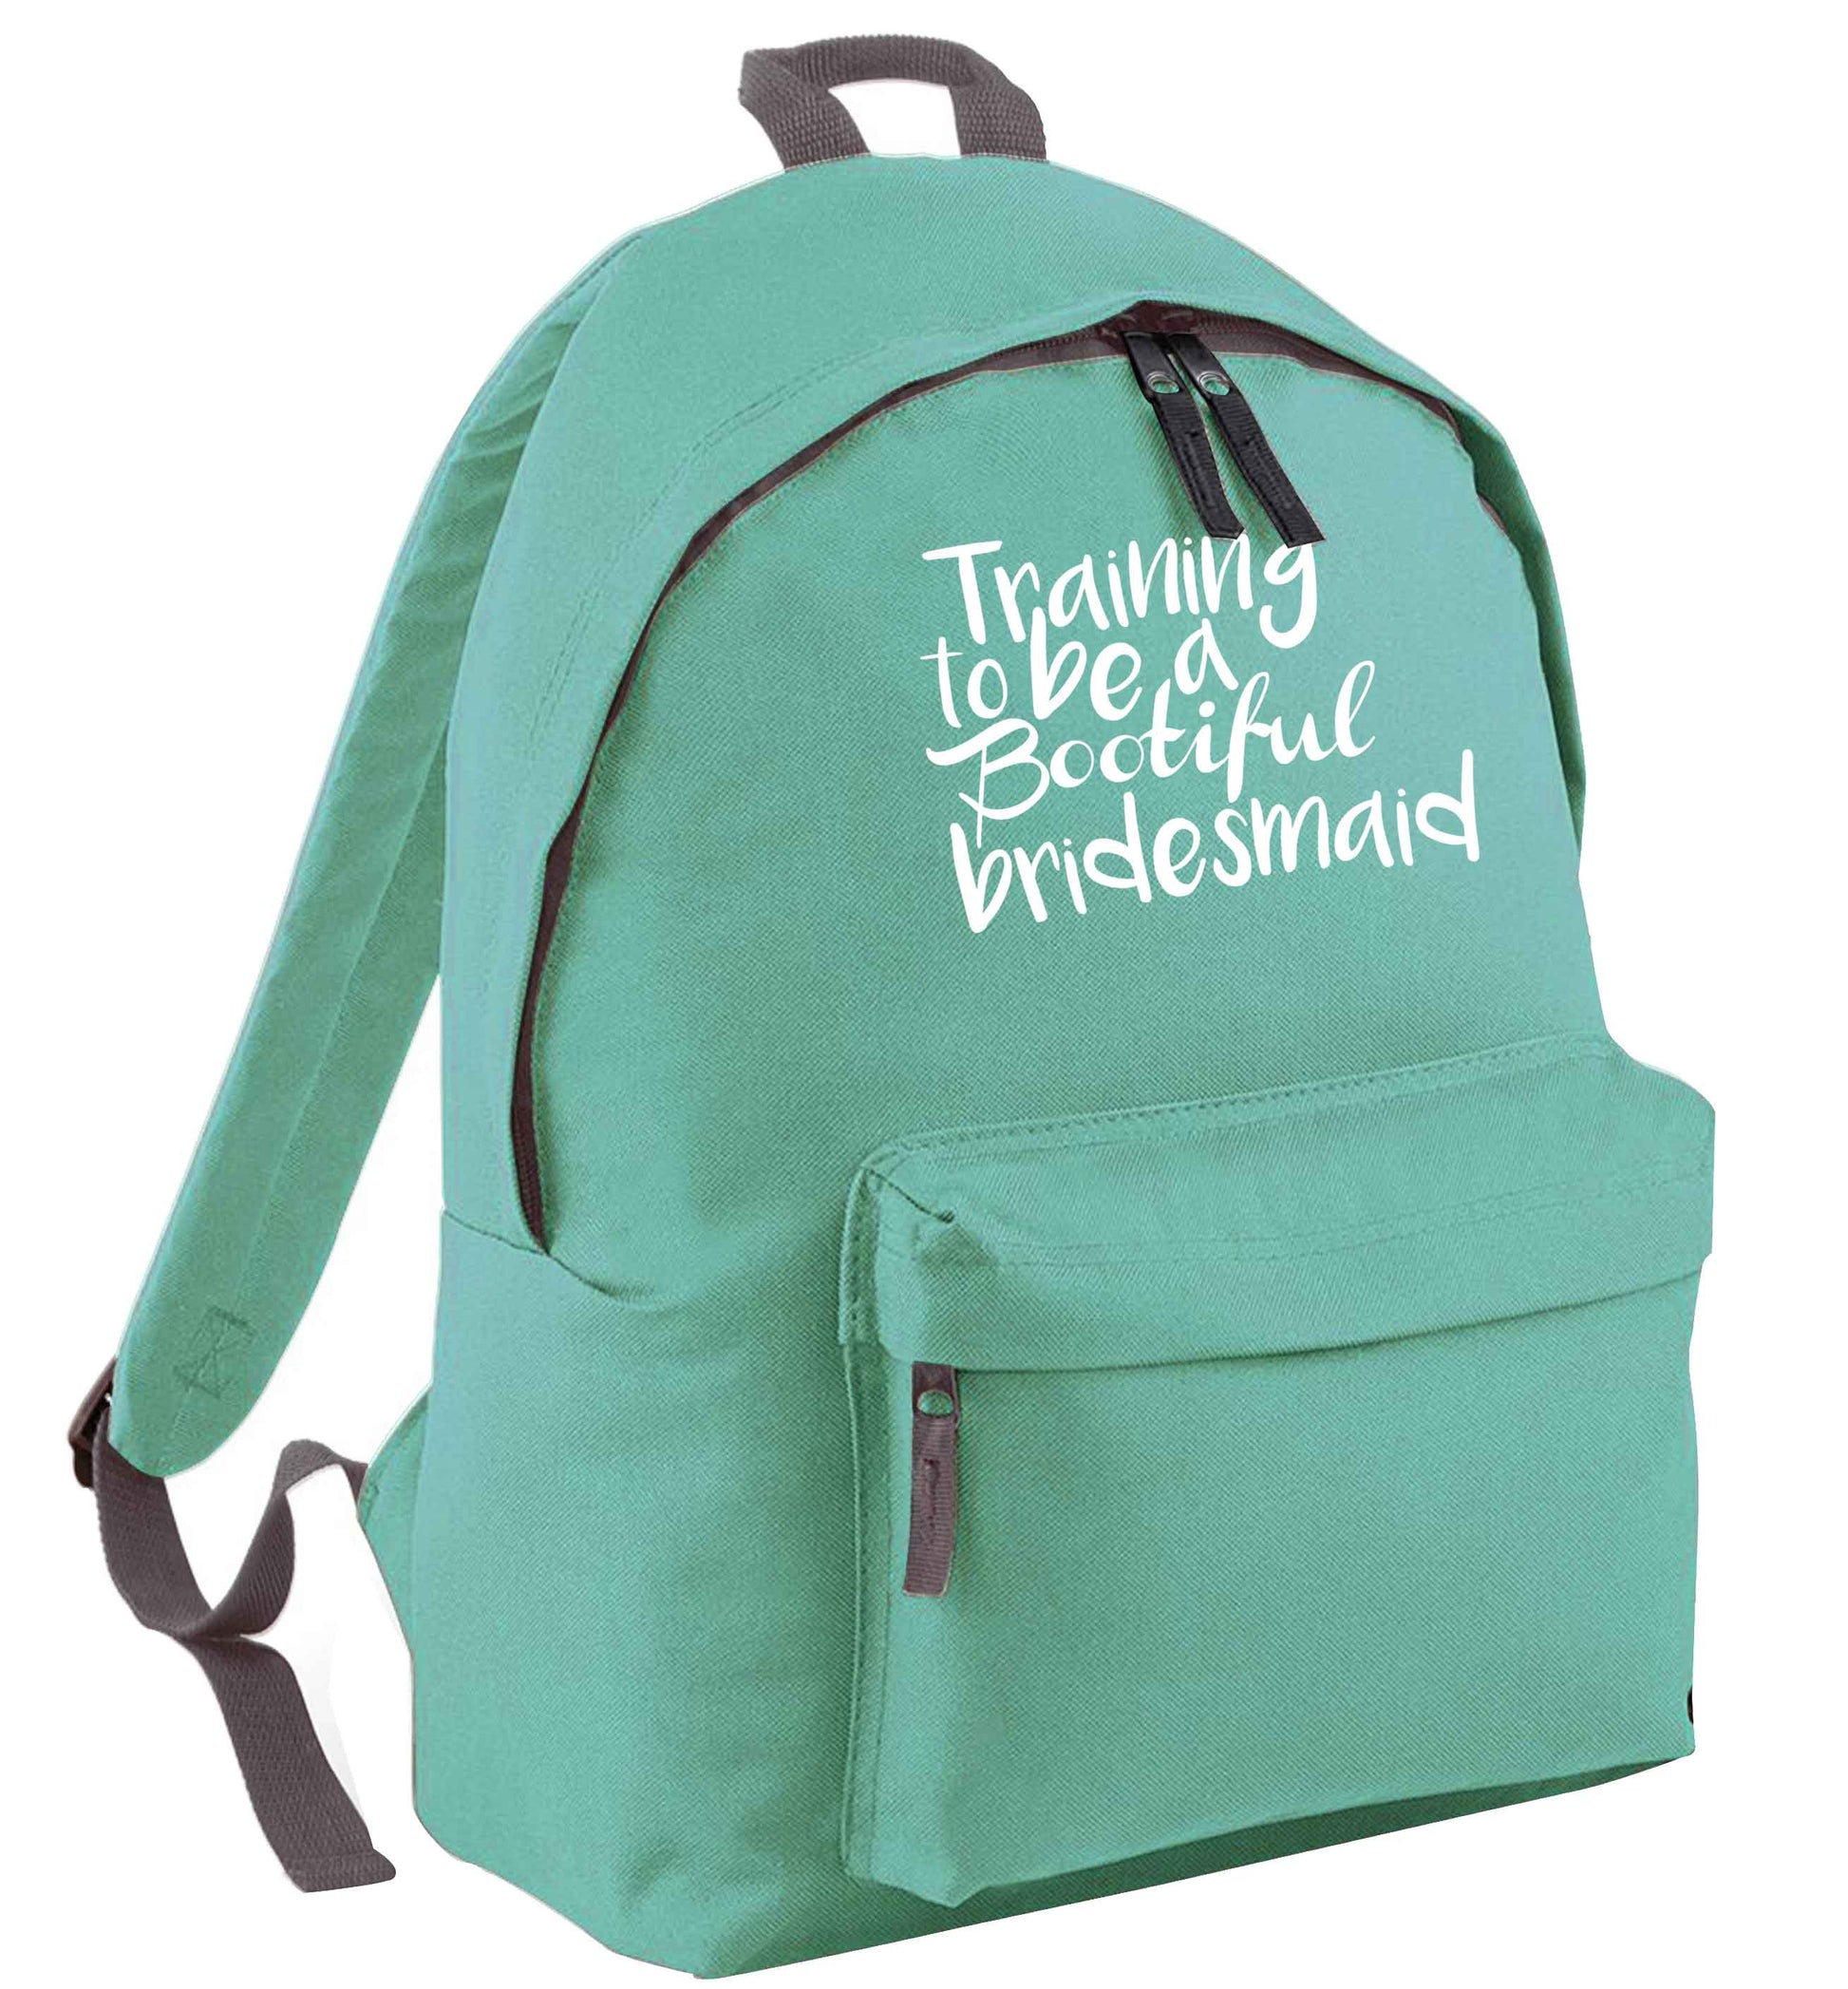 Get motivated and get fit for your big day! Our workout quotes and designs will get you ready to sweat! Perfect for any bride, groom or bridesmaid to be!  mint adults backpack